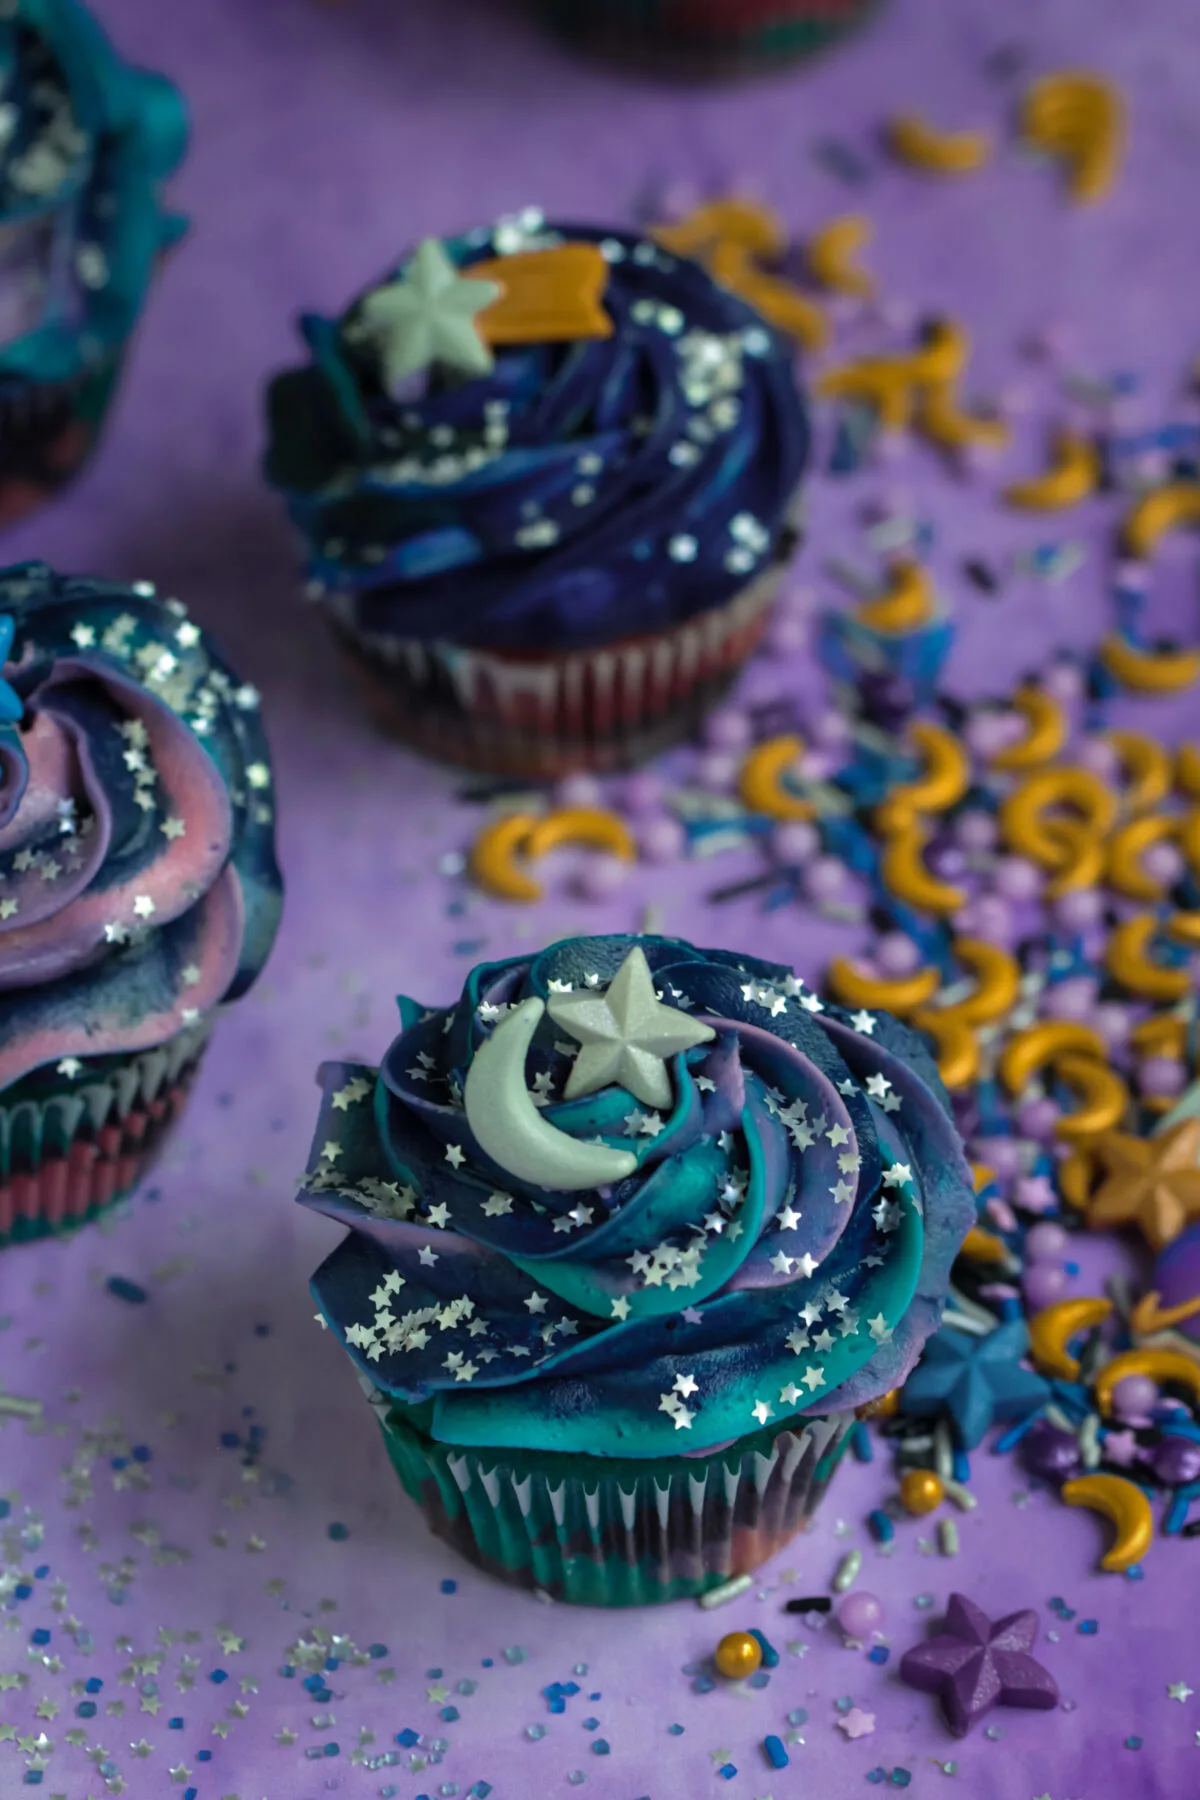 This recipe makes the most gorgeous galaxy cupcakes with a surprise inside! They're perfect for any outer space themed party.